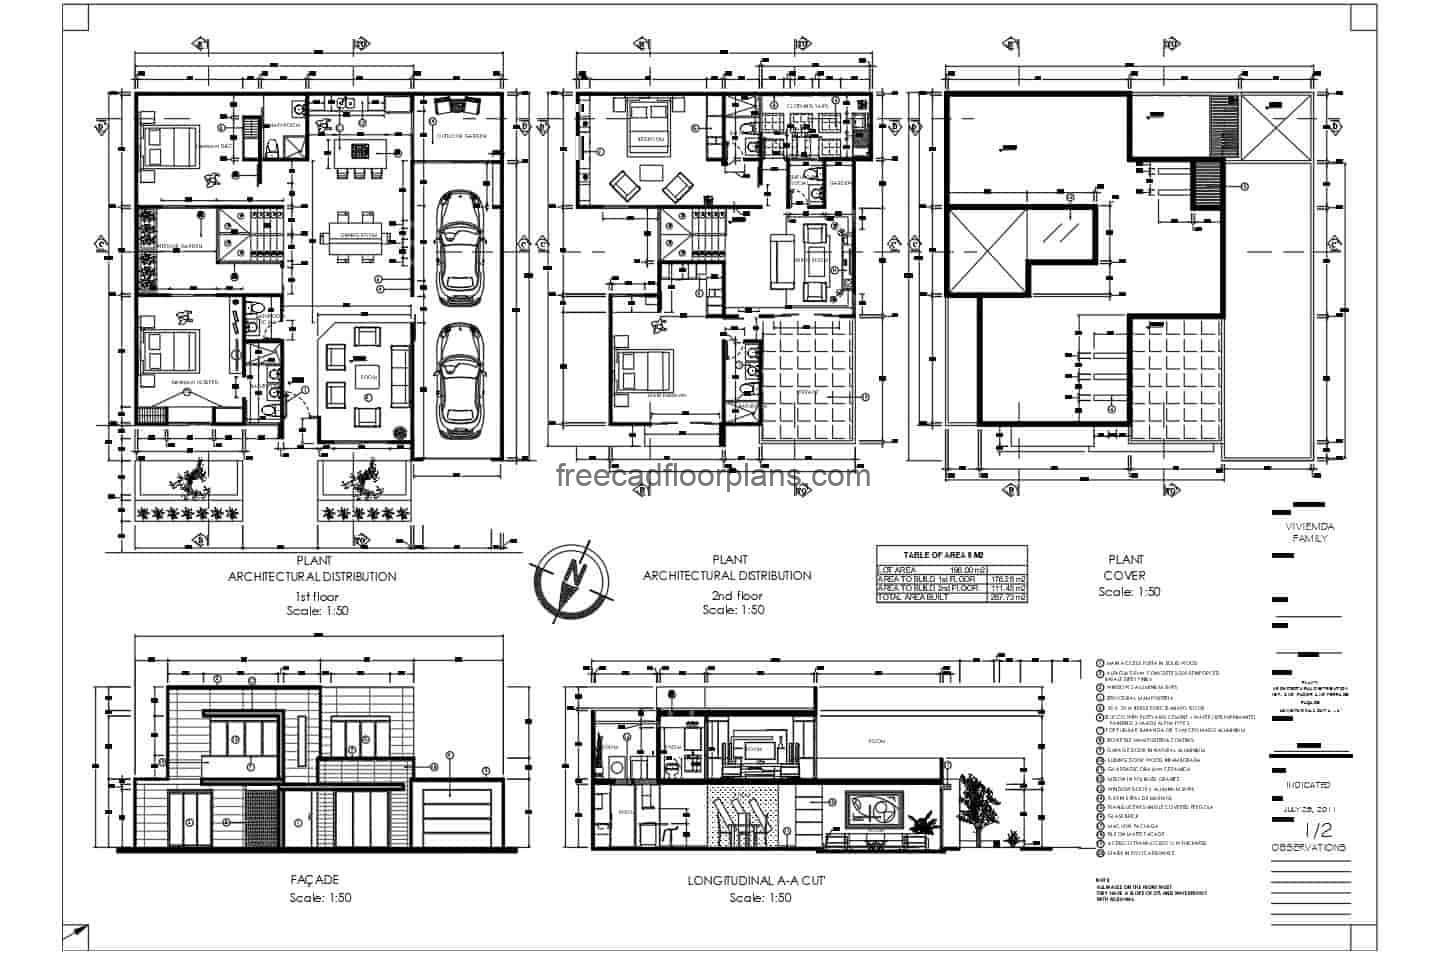 2D plans of a complete pre-project of a modern residence of two levels of concrete with four rooms in total divided into two levels, first level, parking for two vehicles, two bedrooms, living room, kitchen, dining room, laundry area and three bathrooms Second level private area with two bedrooms, family room and terrace. Plan with interior details in Autocad DWG format for free download.